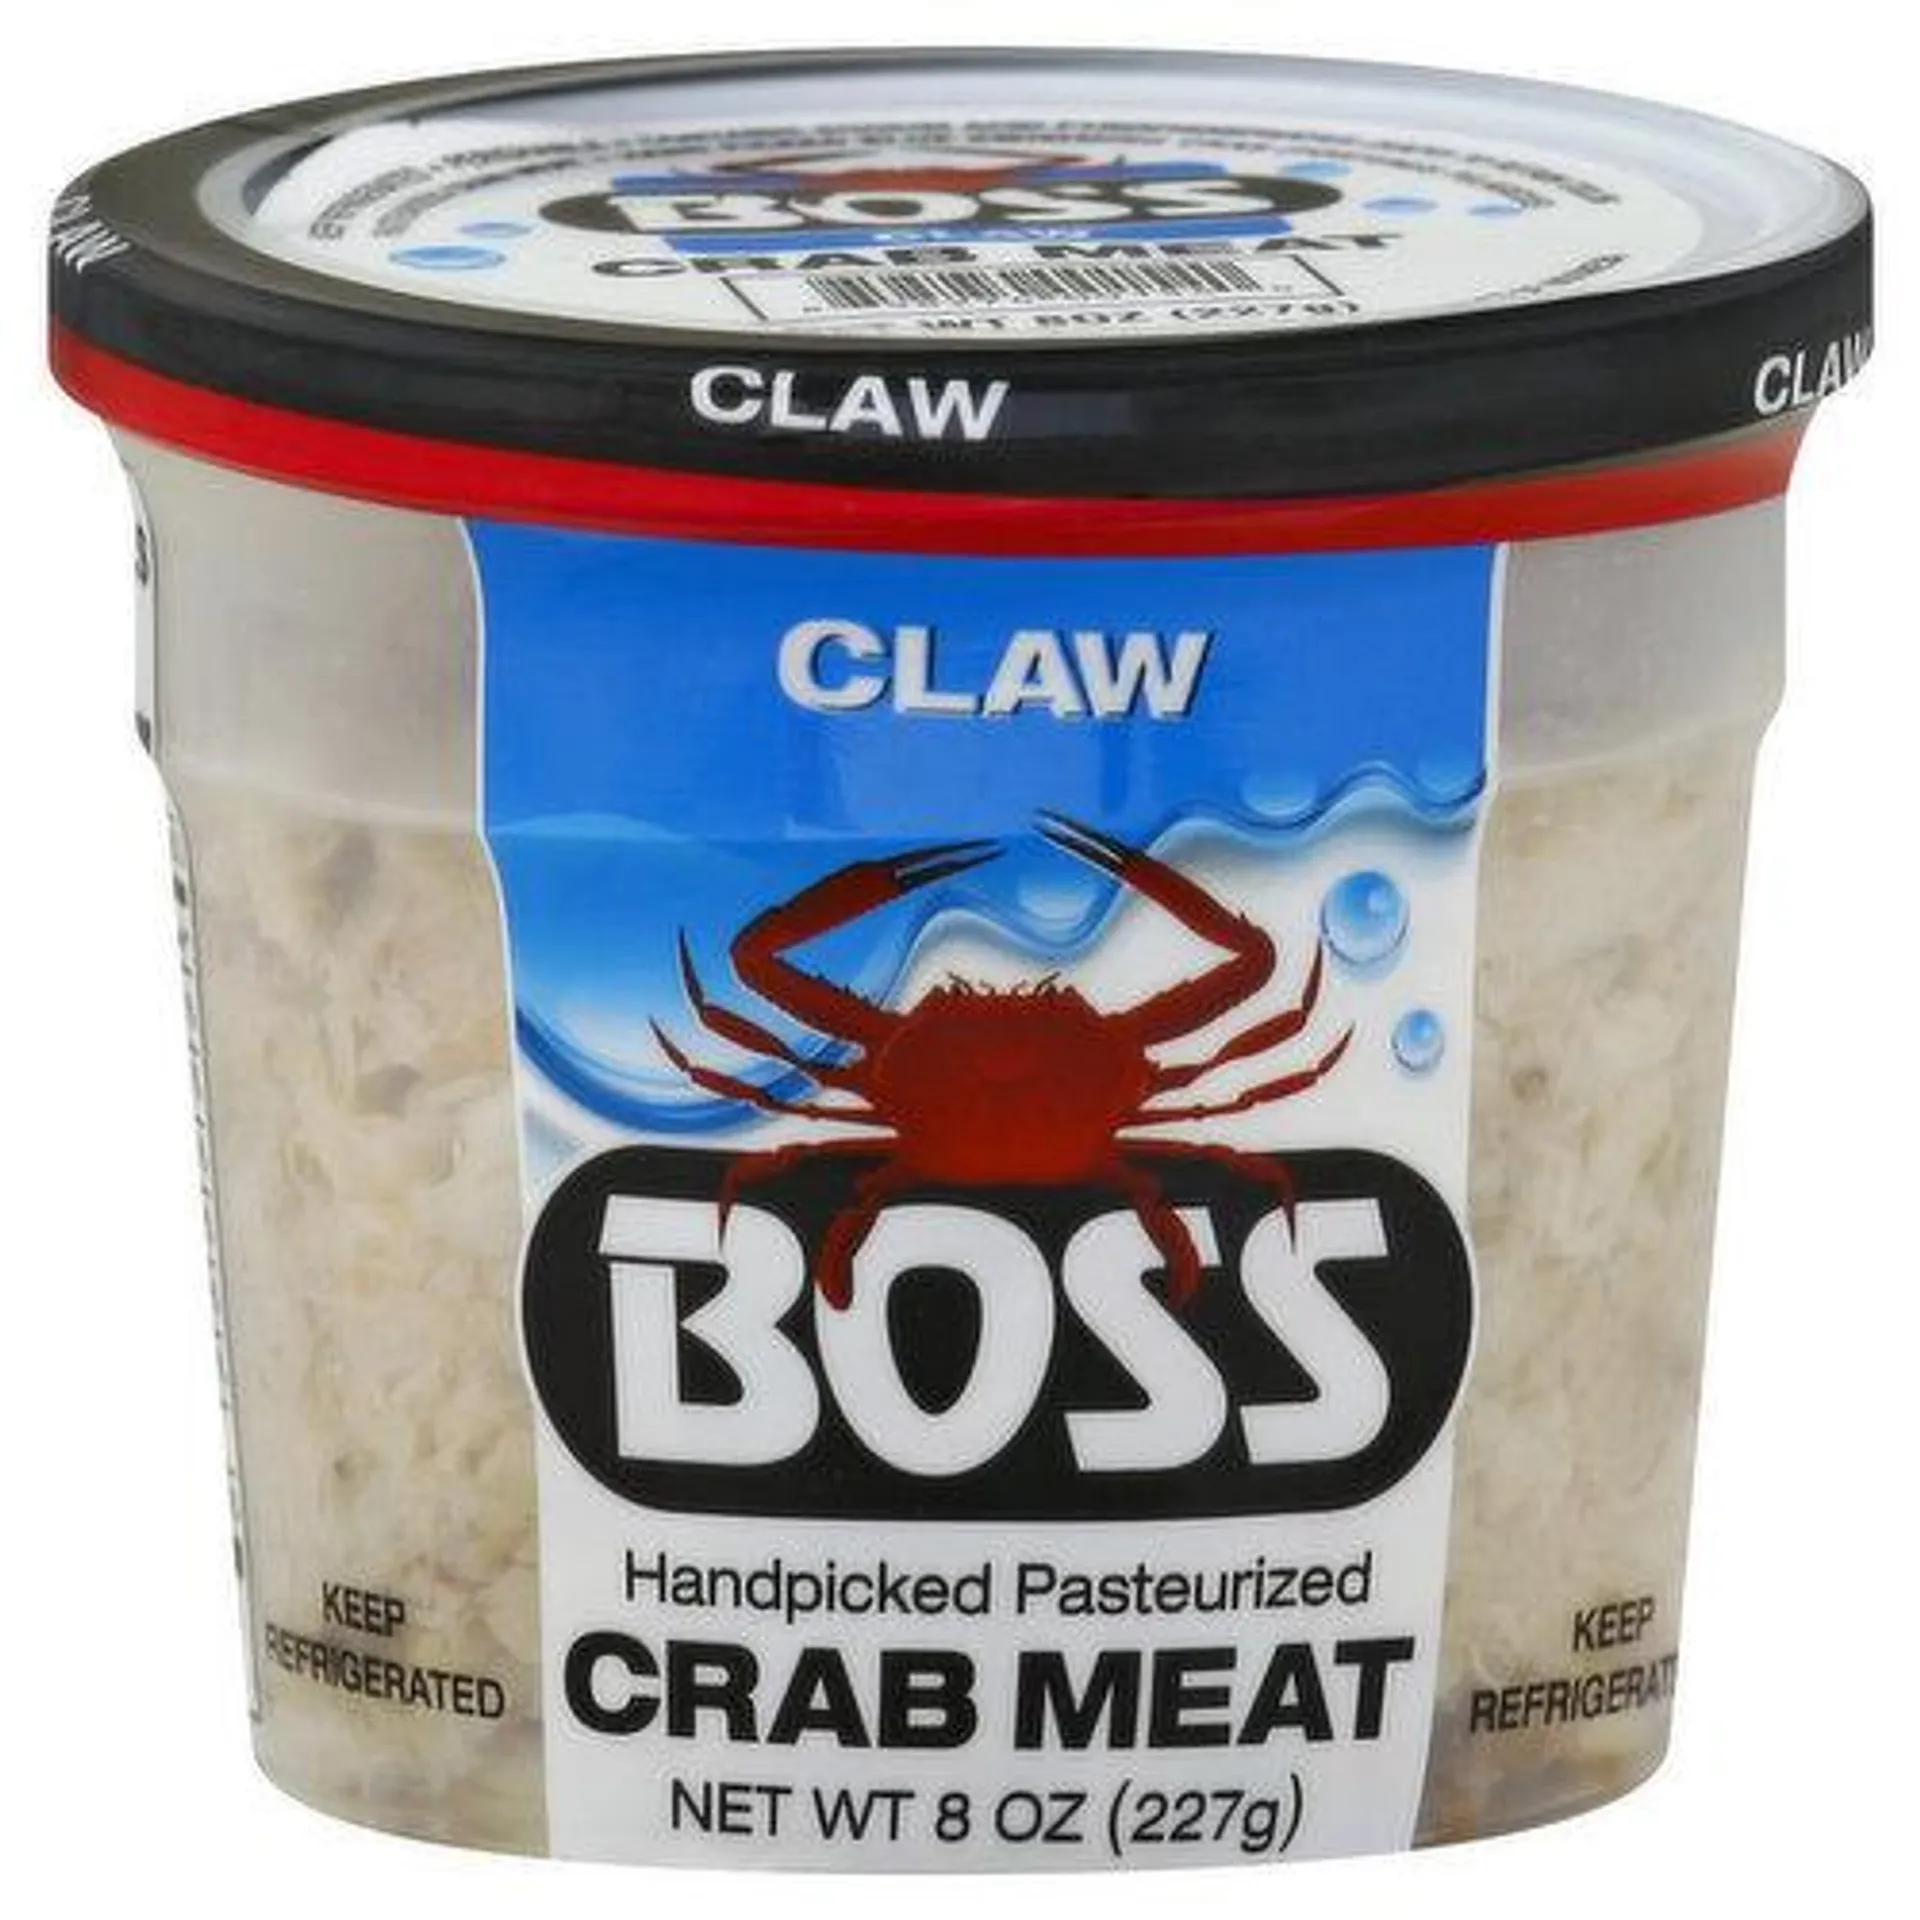 Boss Crab Meat, Claw - 8 Ounce